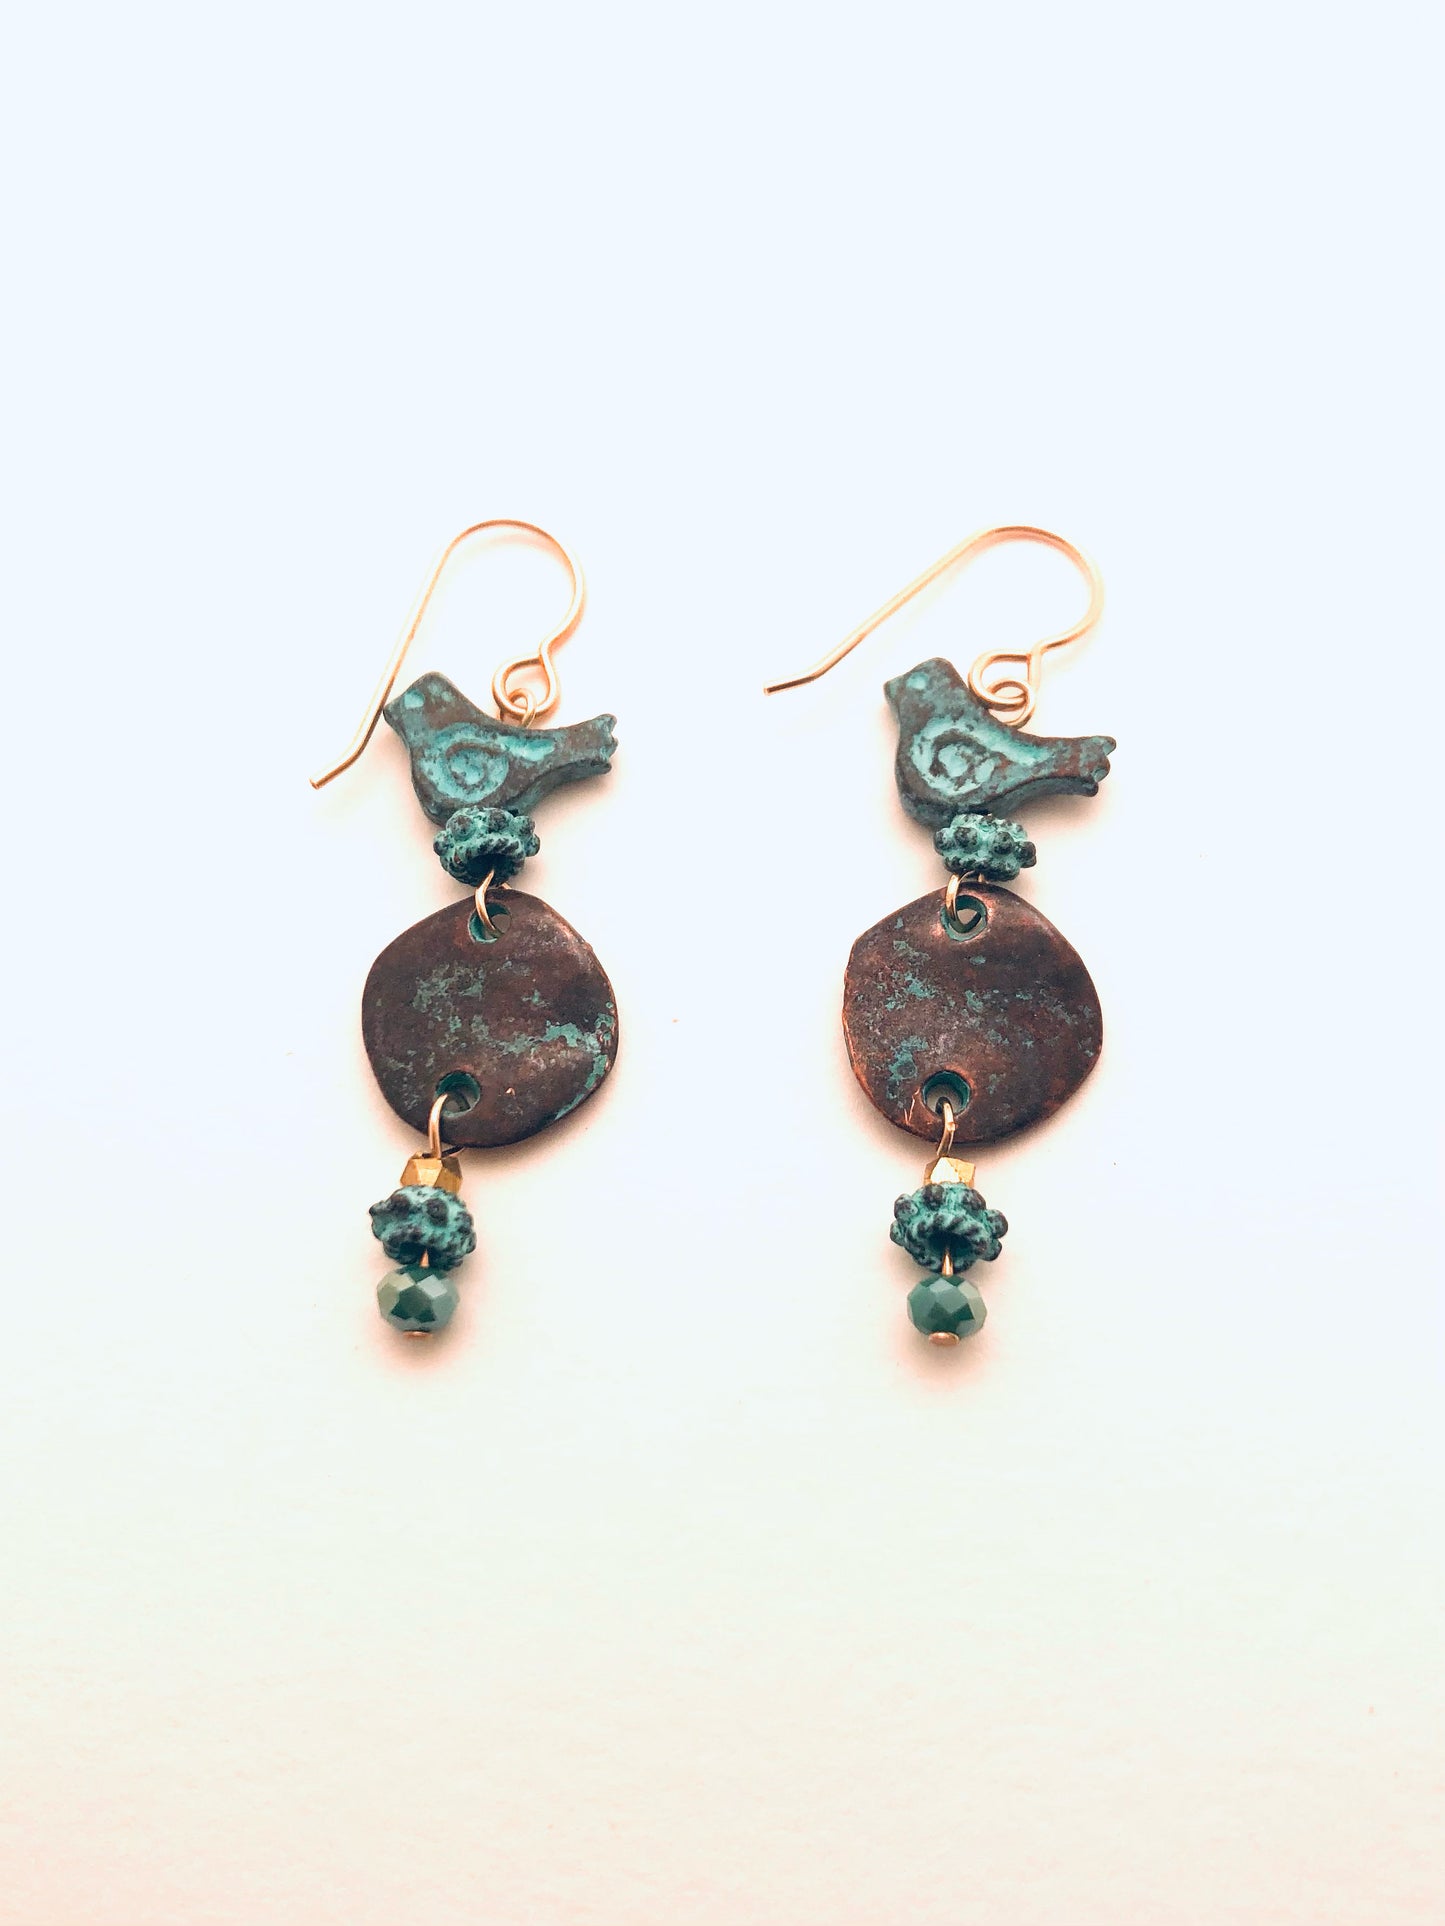 Patina Bronze Earings with Birds